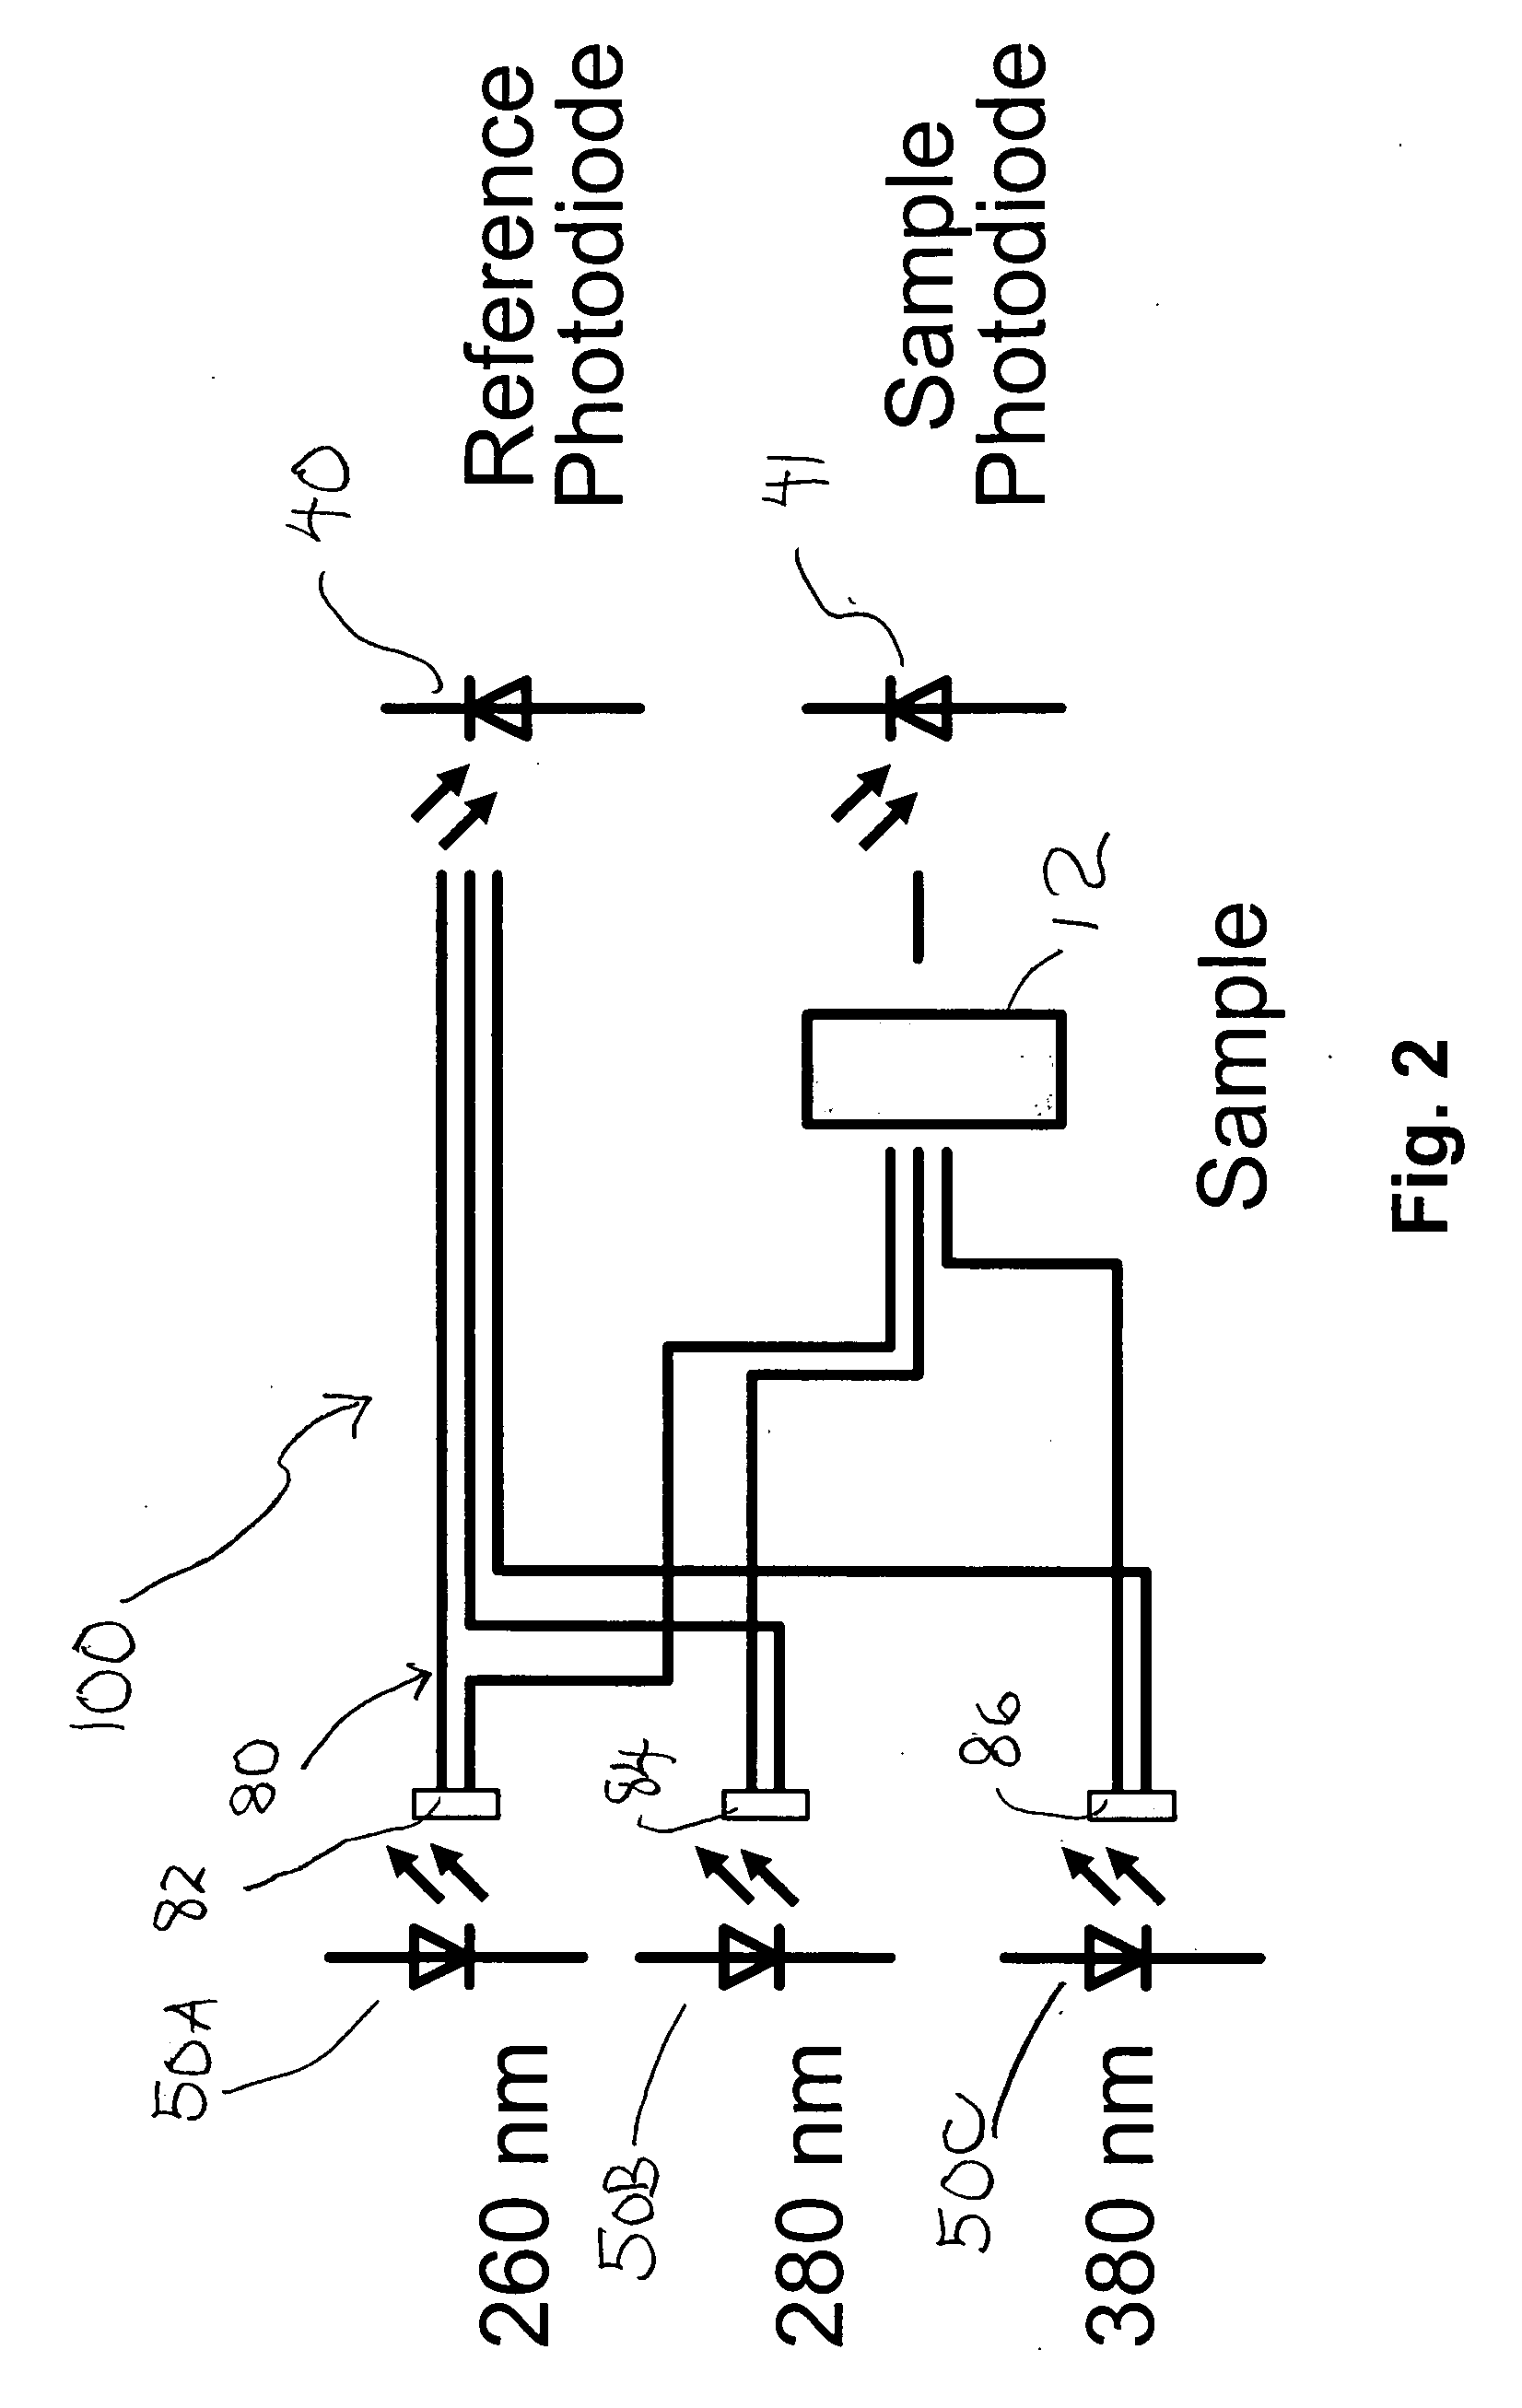 Self referencing LED detection system for spectroscopy applications